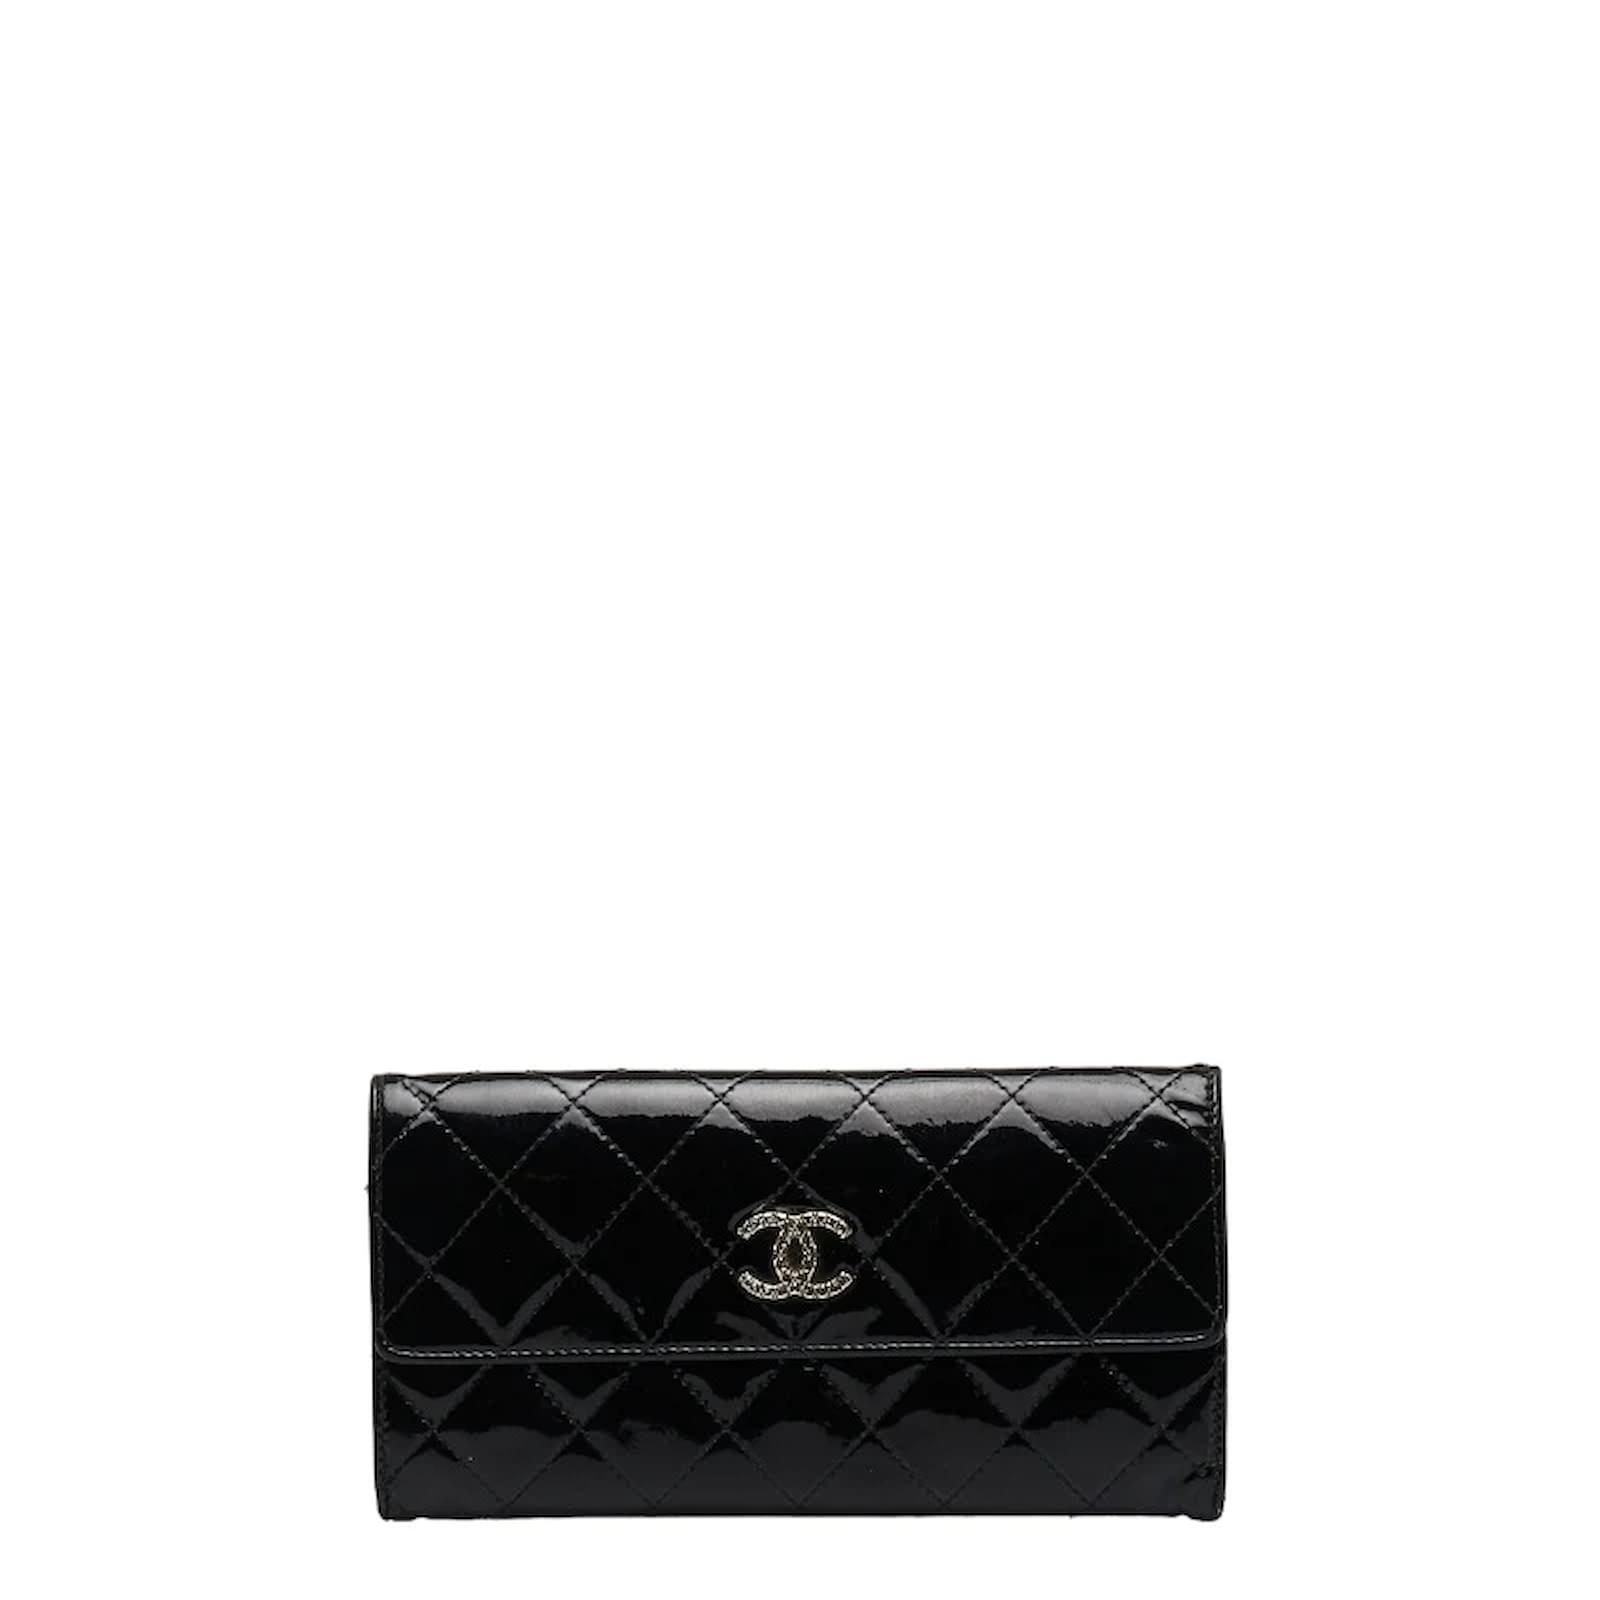 CHANEL, Bags, Chanel Gusset Classic Flap Wallet Woc